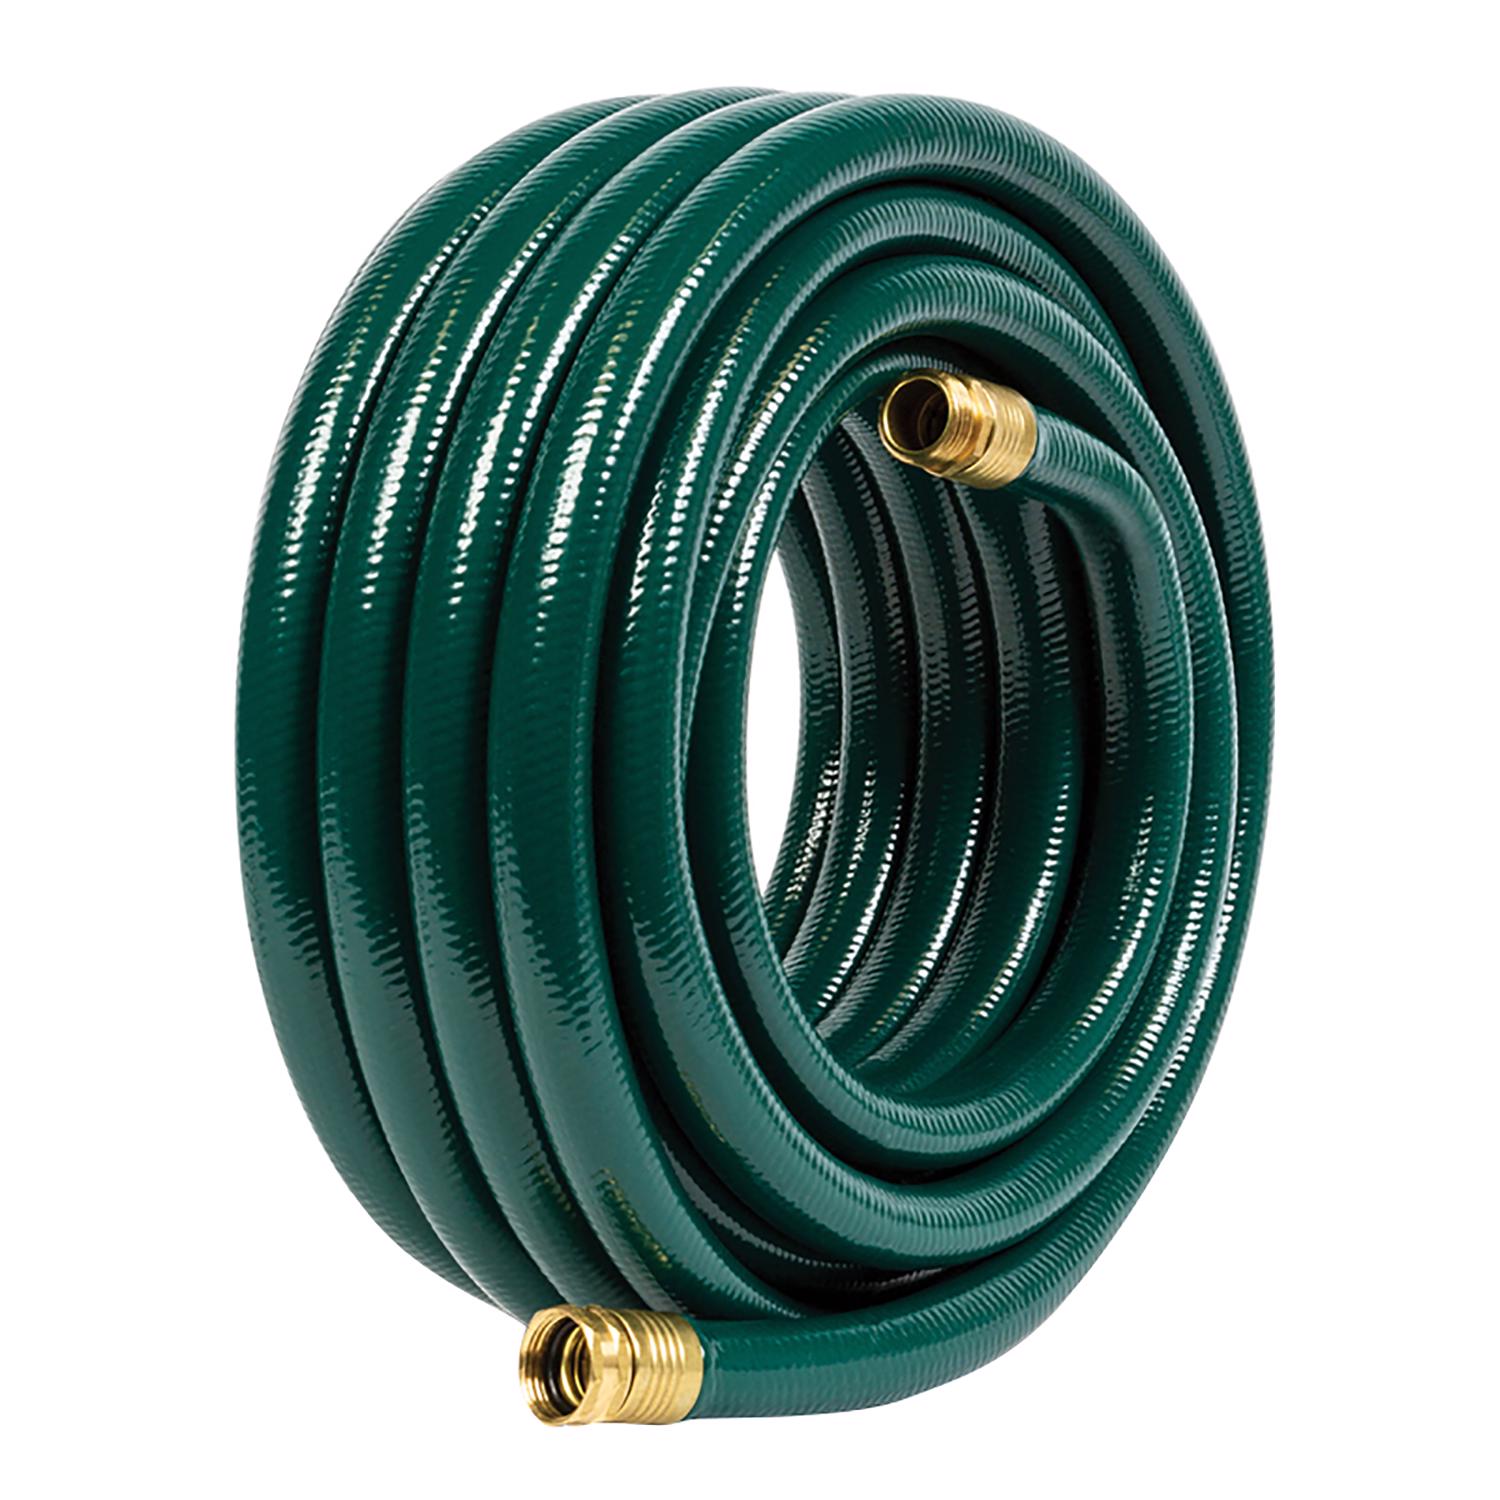 Legacy Flexzilla 5/16 in. D X 50 ft. L Pressure Washer Hose 3100 psi - Ace  Hardware